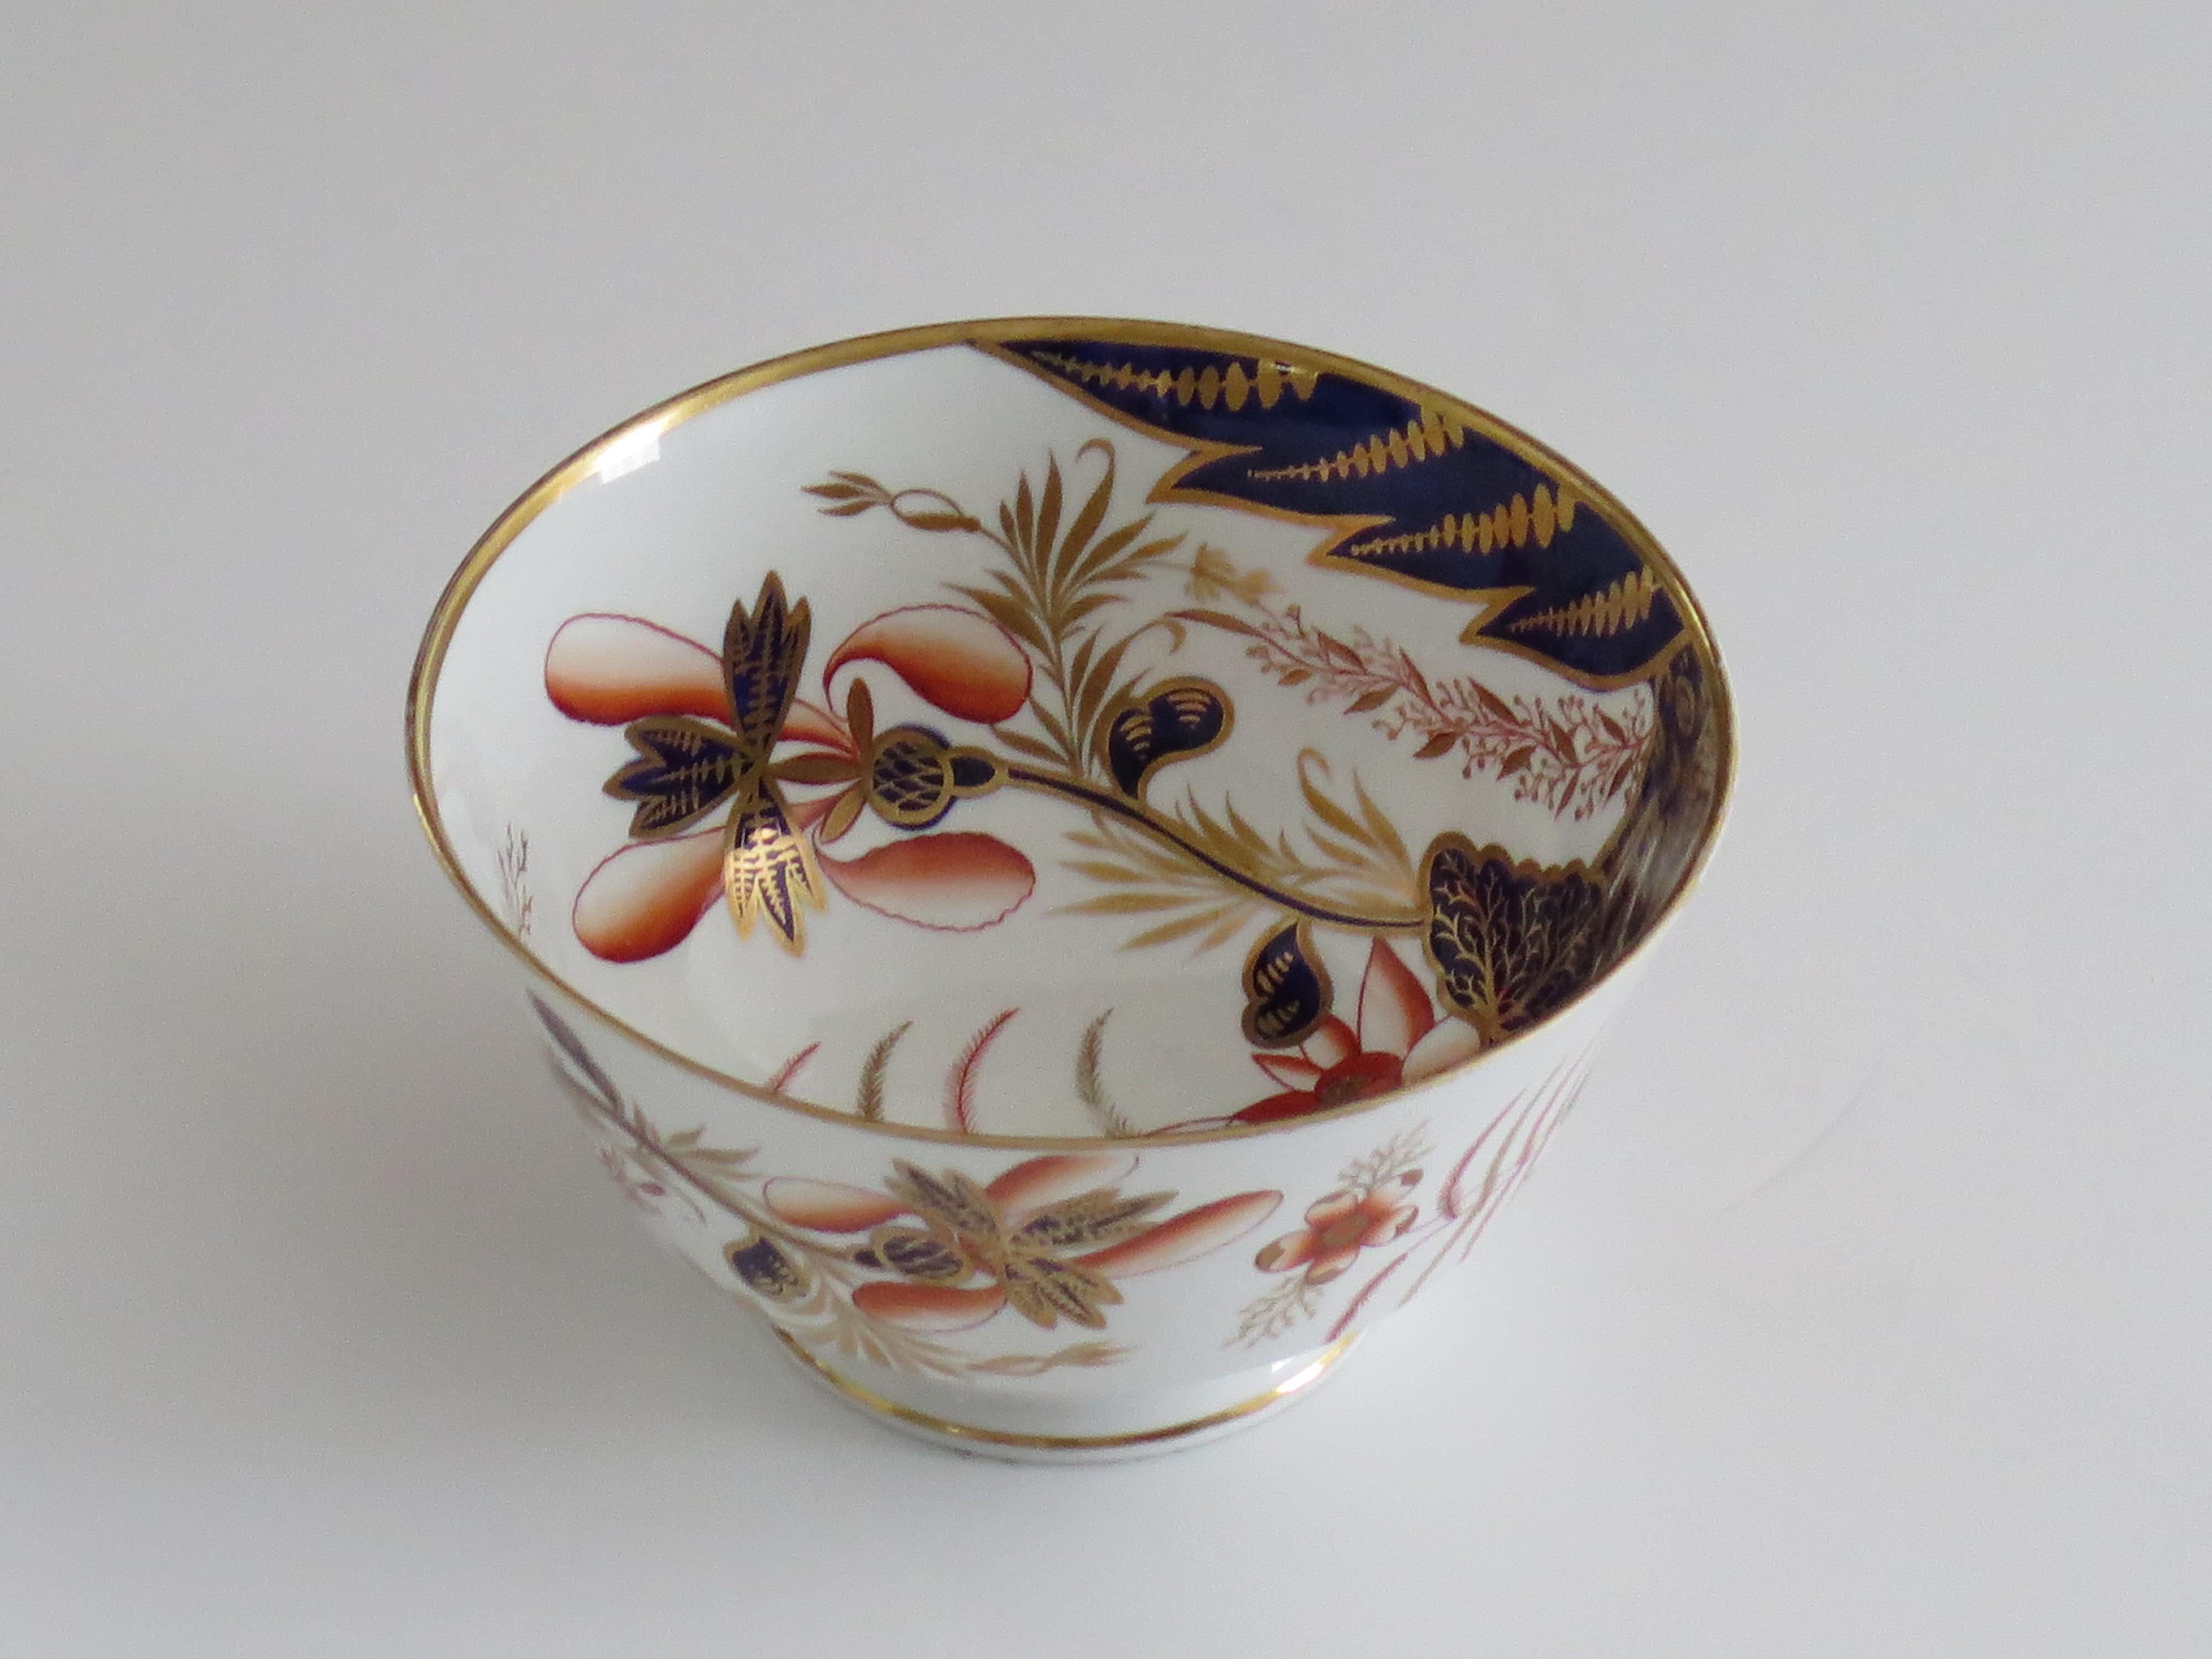 Hand-Painted Early 19th Century Spode Porcelain Slop Bowl in gilded Pattern 2214, Ca 1810 For Sale